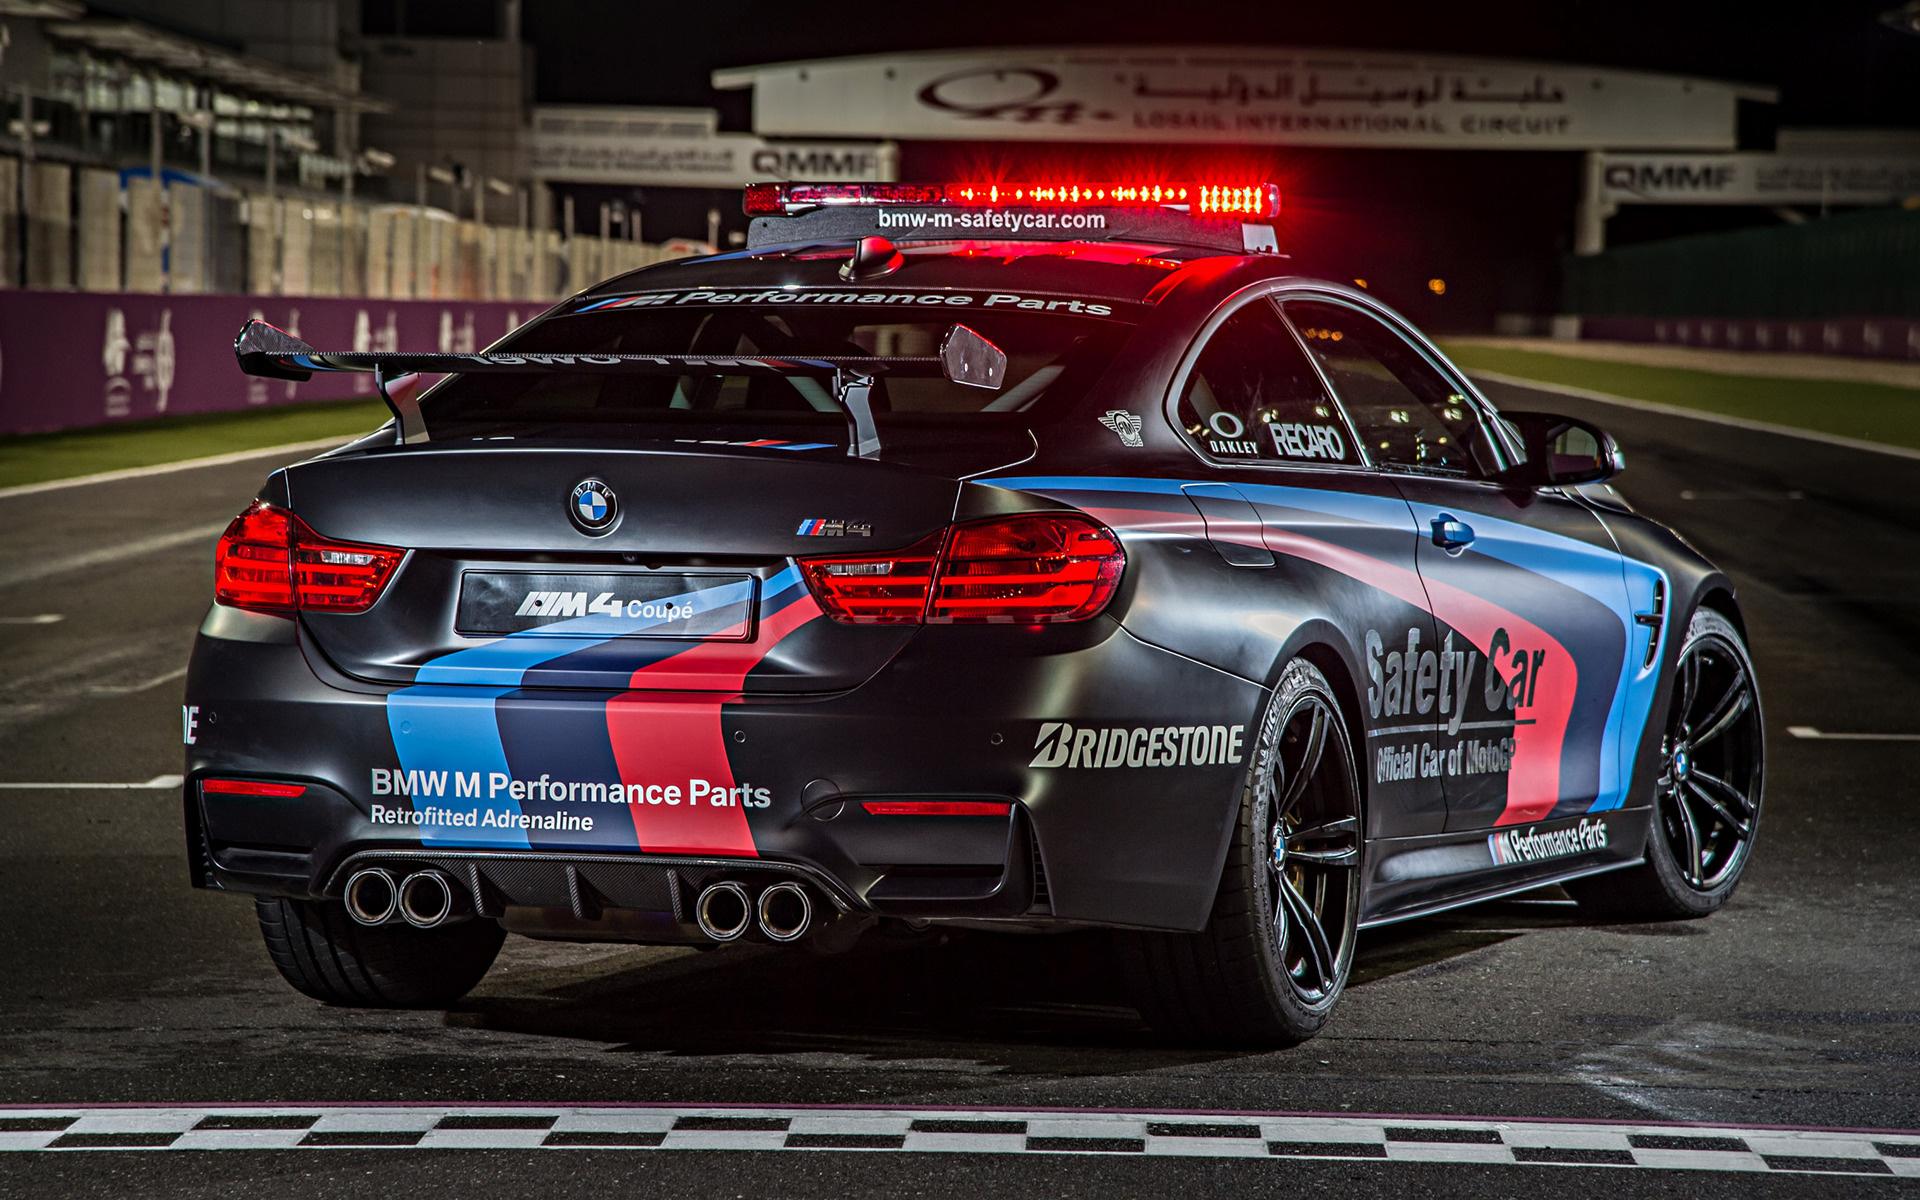 All in One Wallpaper: BMW M4 Coupe MotoGP Safety Car 2015